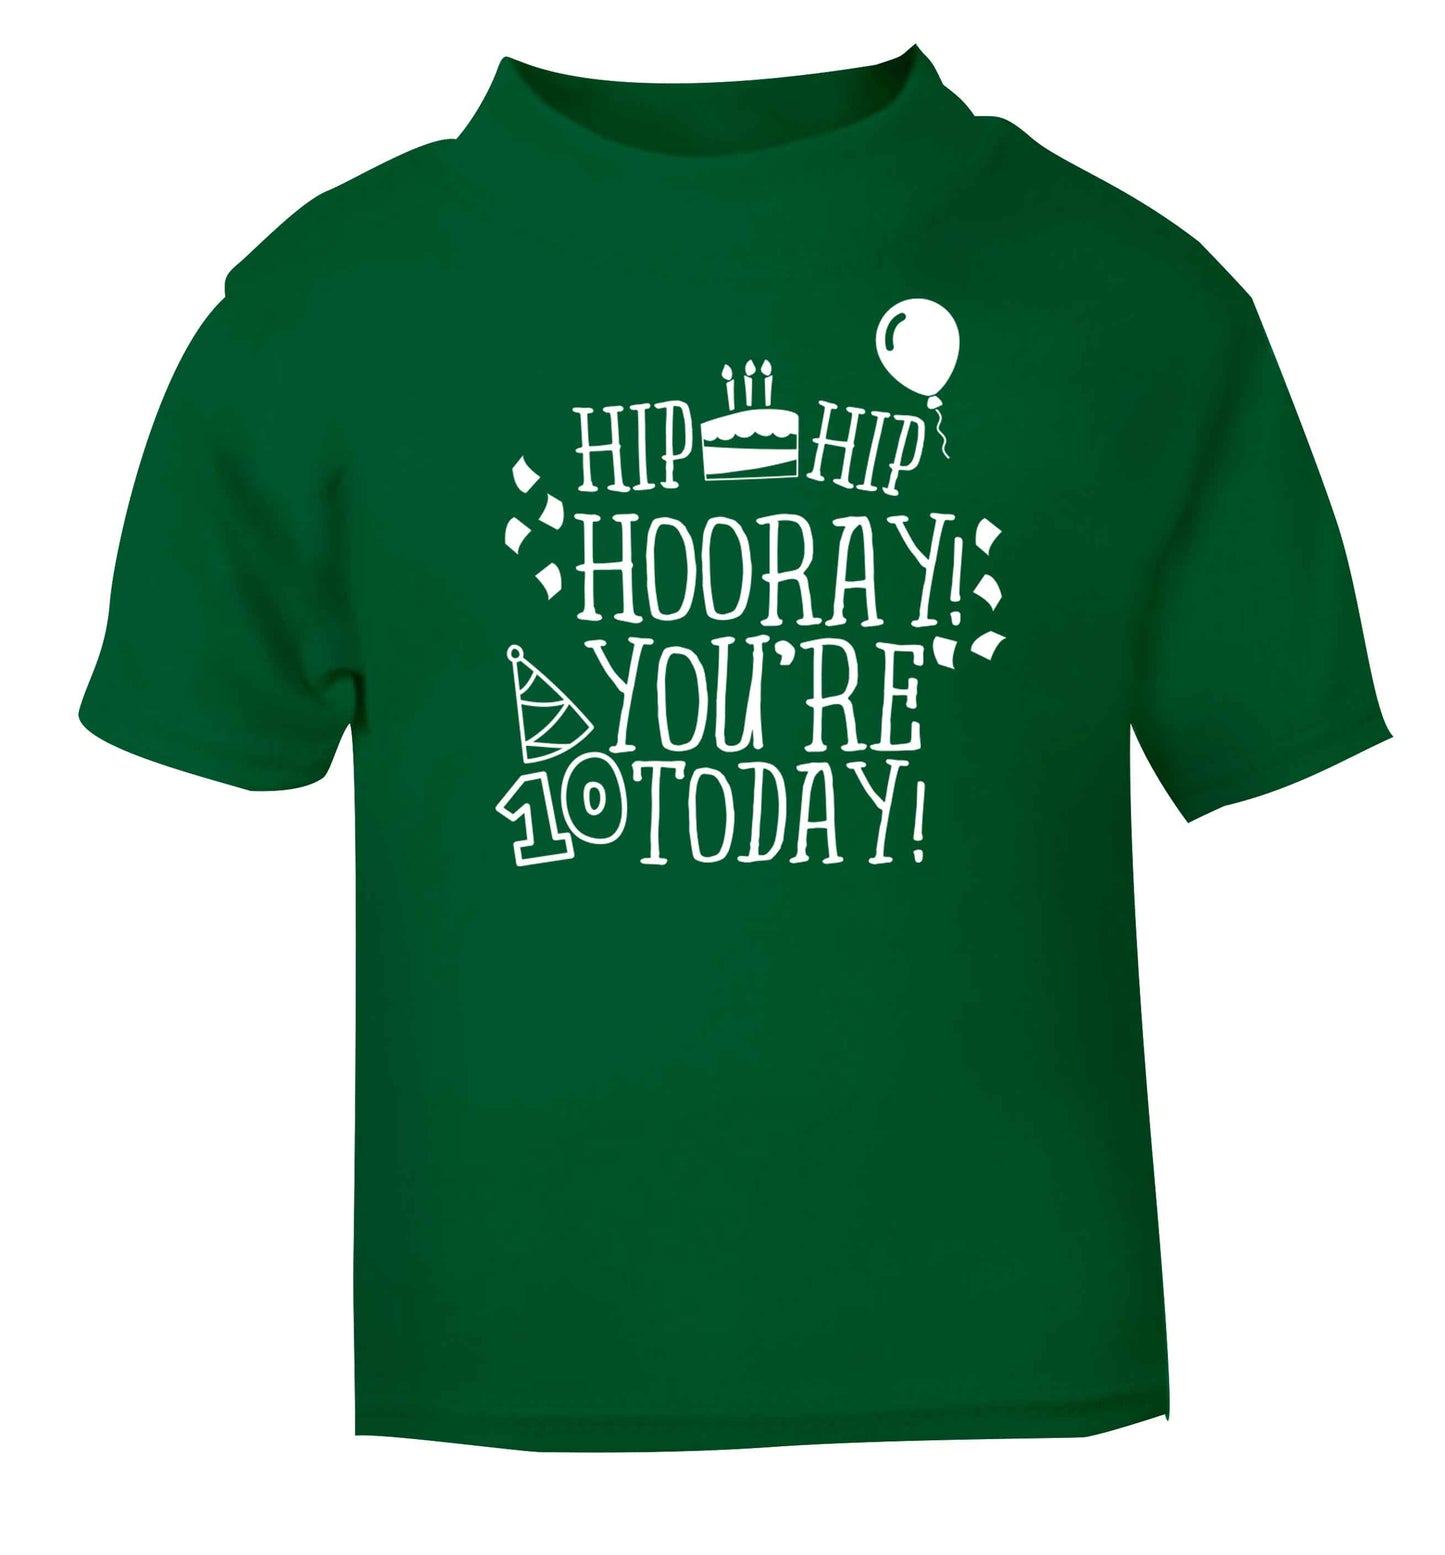 Hip hip hooray you're ten today! green baby toddler Tshirt 2 Years